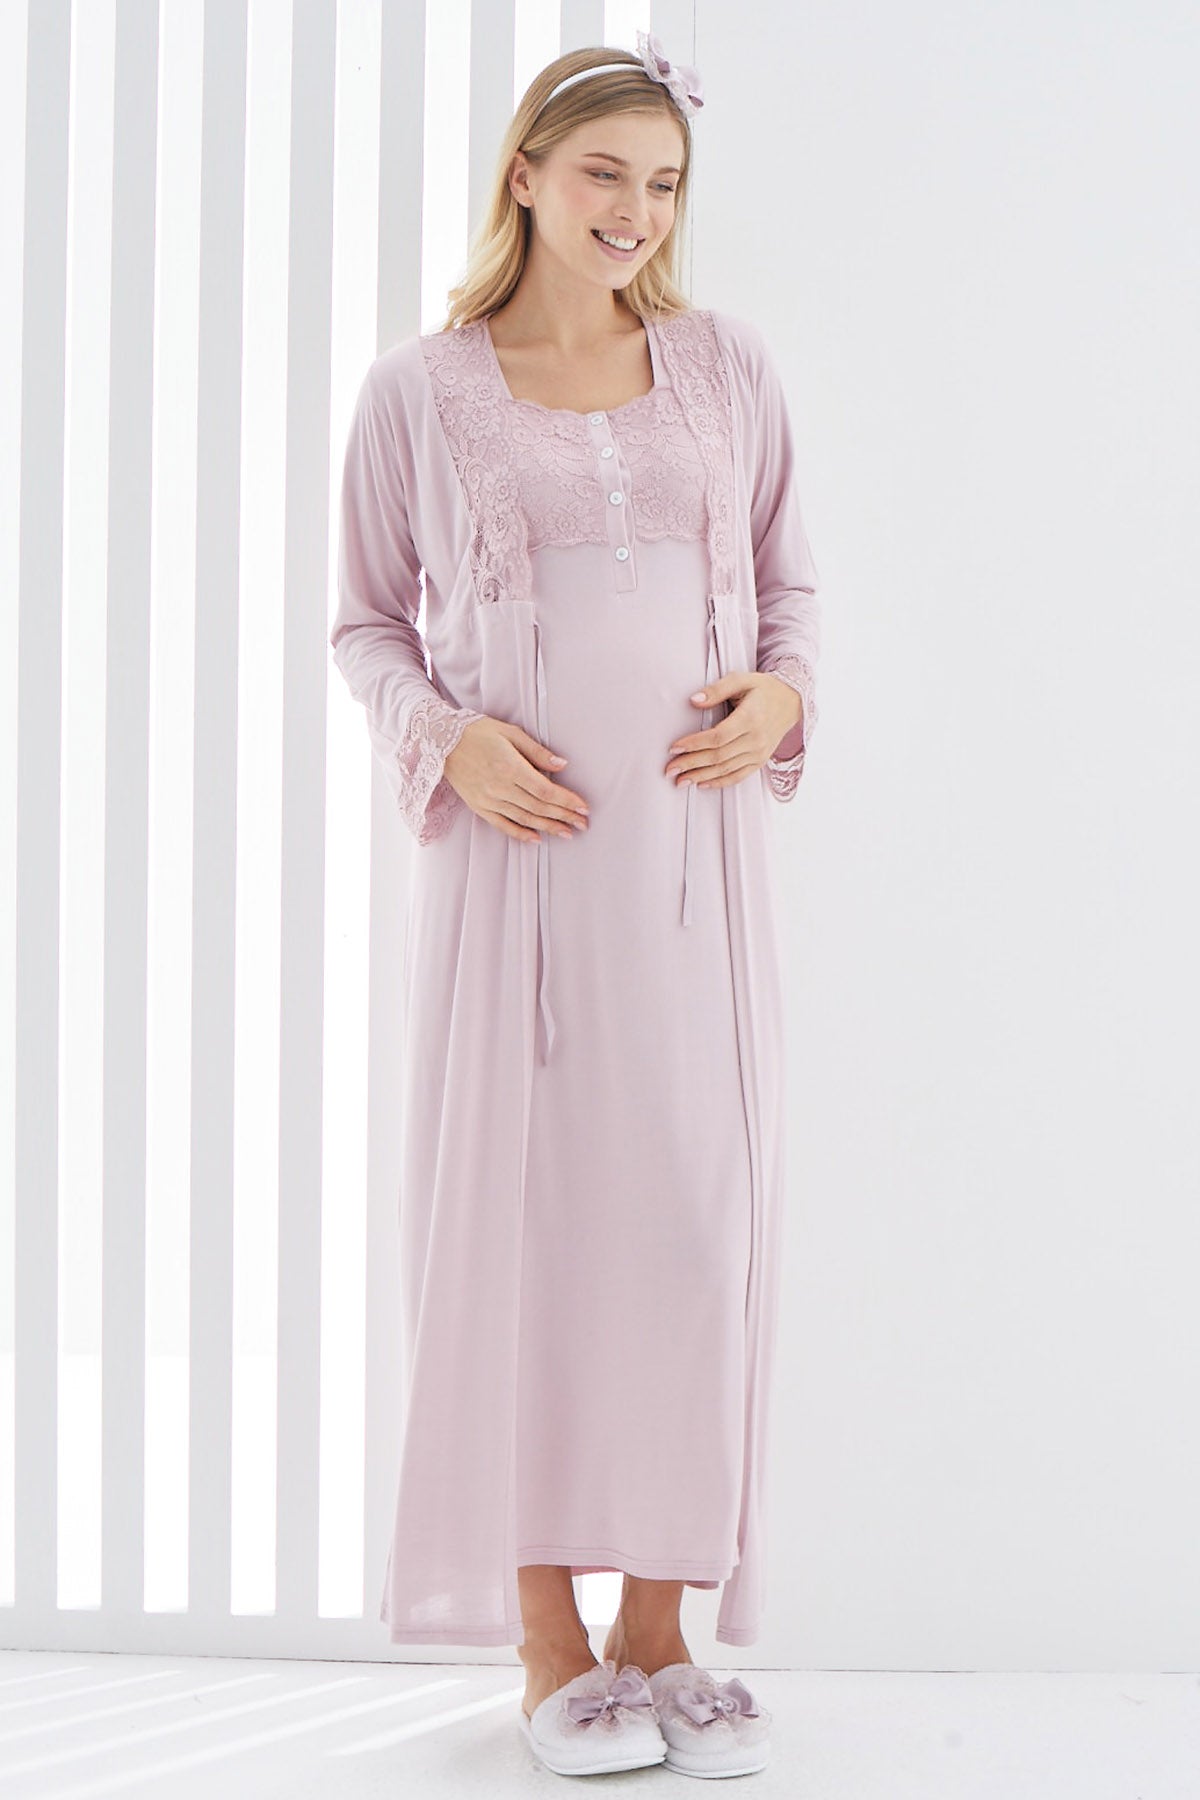 Shopymommy 2267 Maternity & Nursing Nightgown With Lace Sleeve Robe Dried Rose